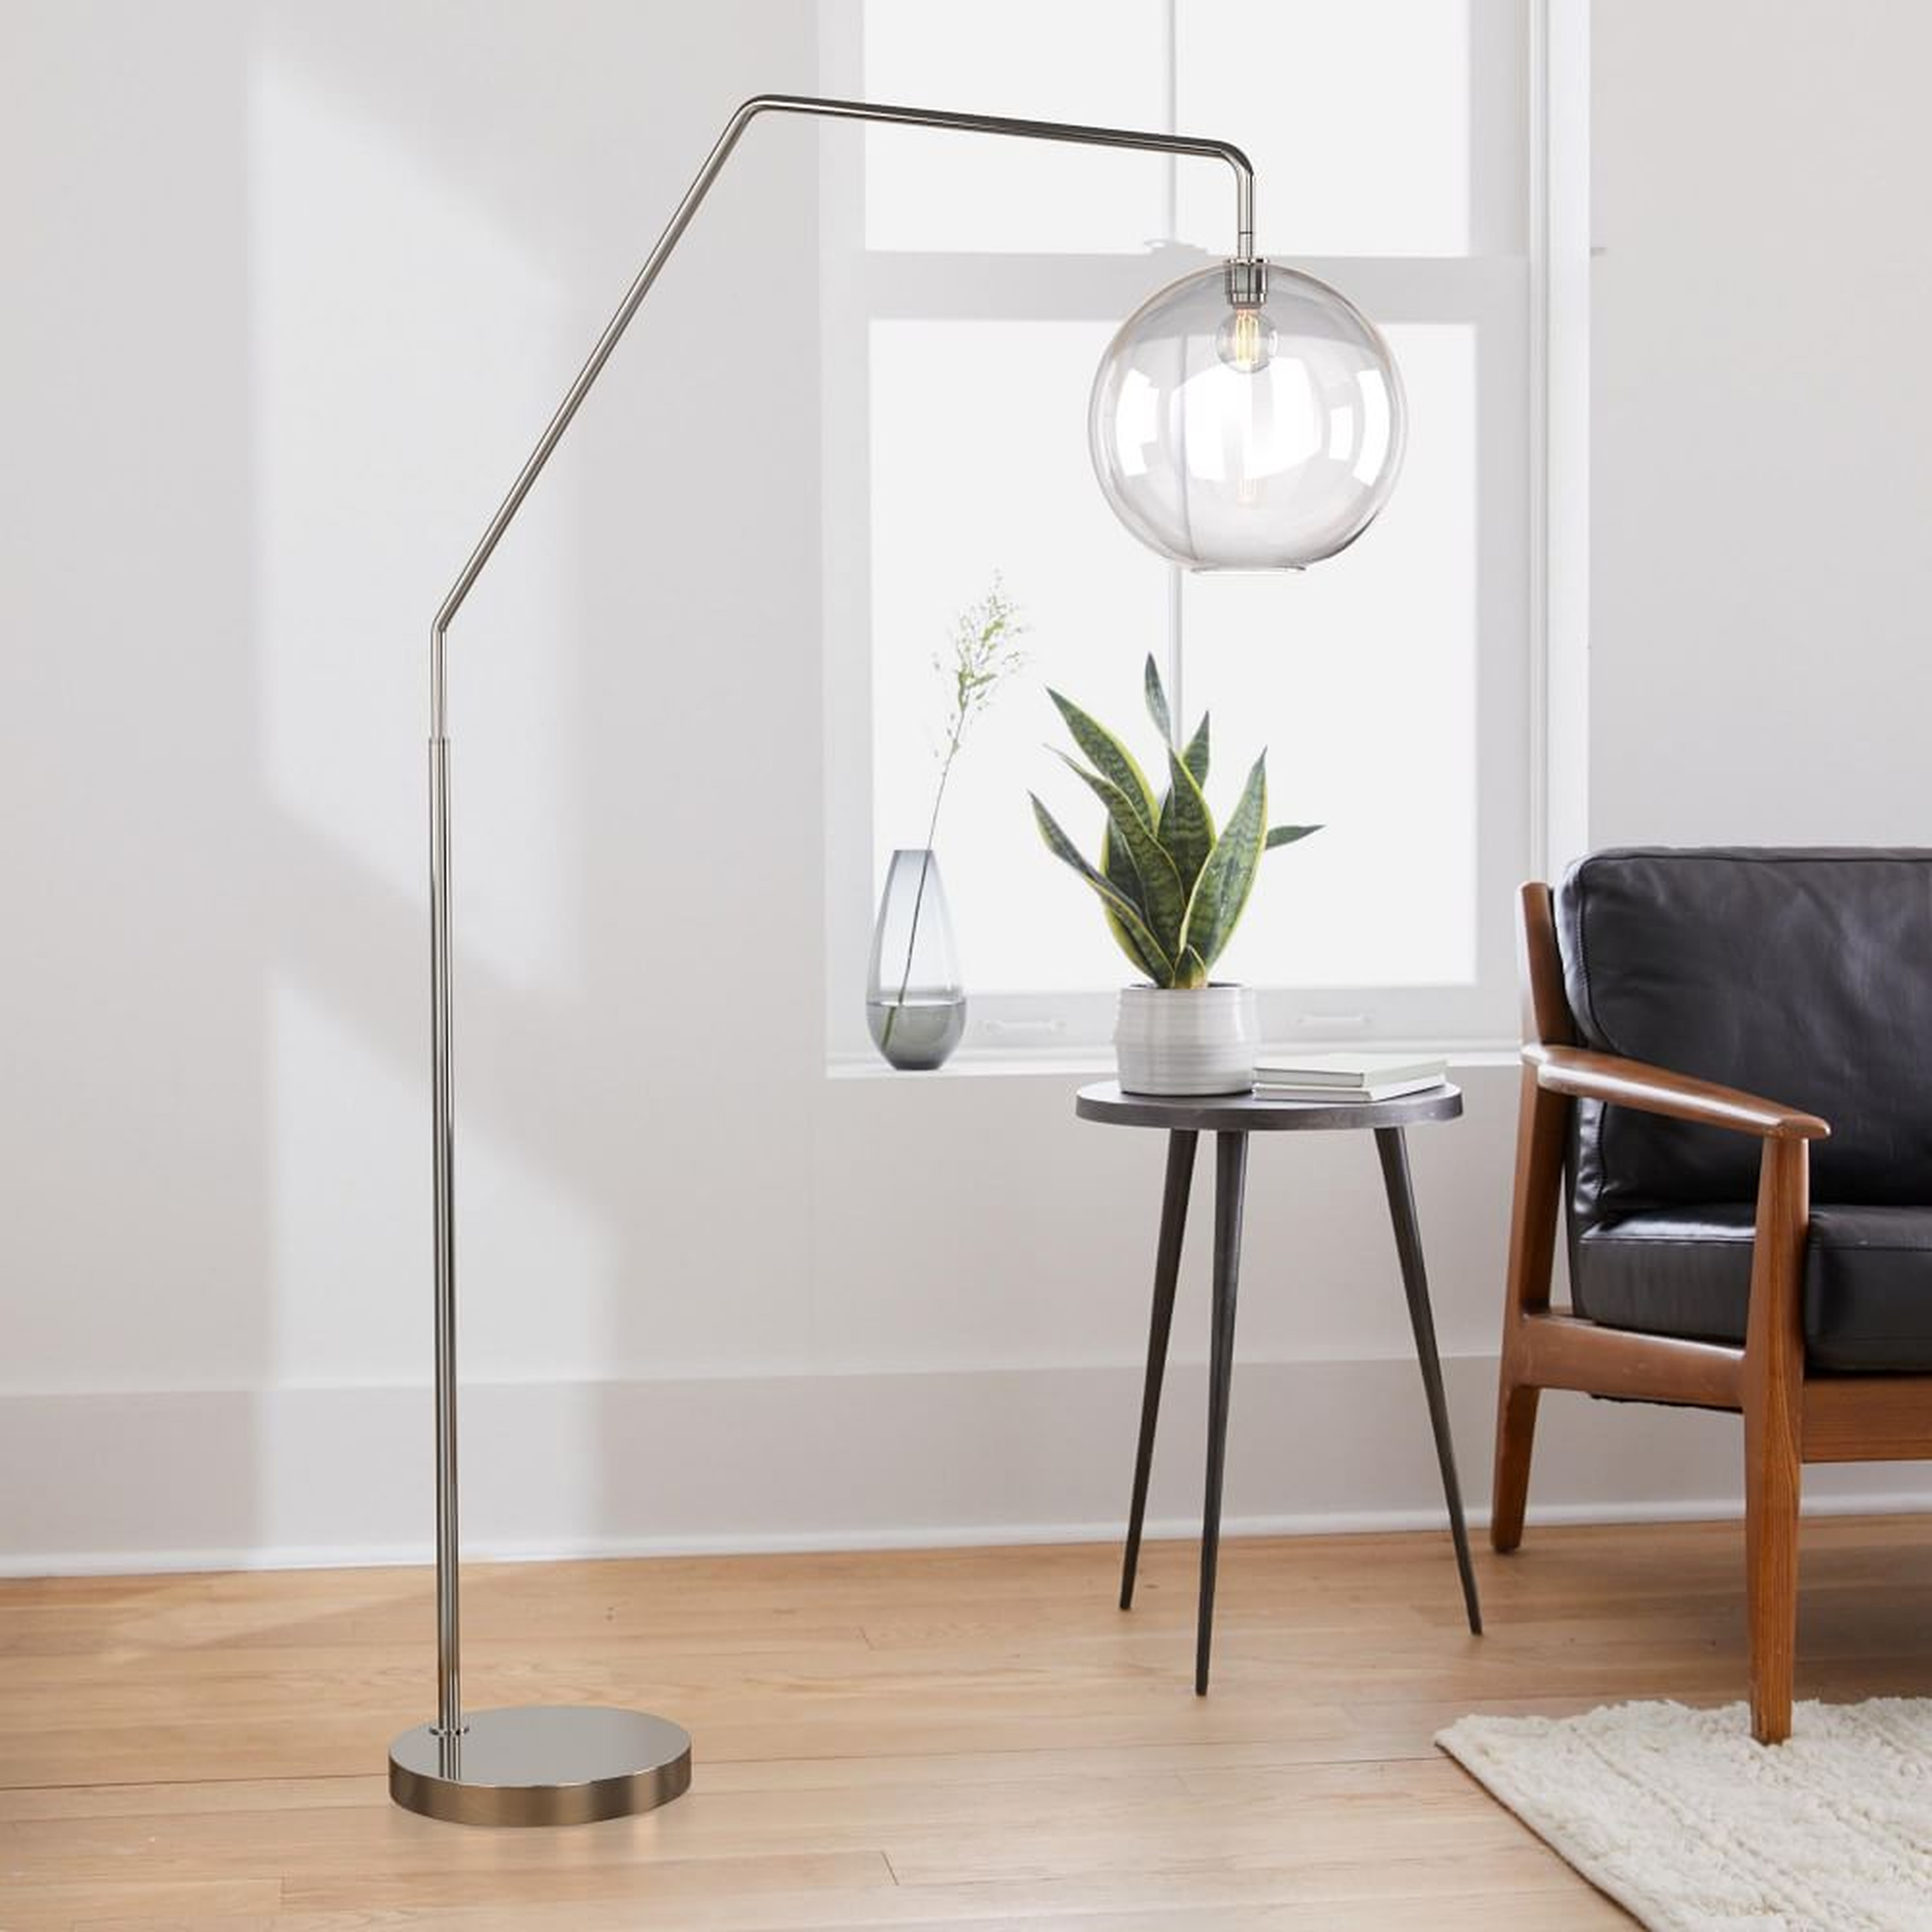 Sculptural Overarching Floor Lamp, Globe Large, Clear, Polished Nickel, 13" - West Elm